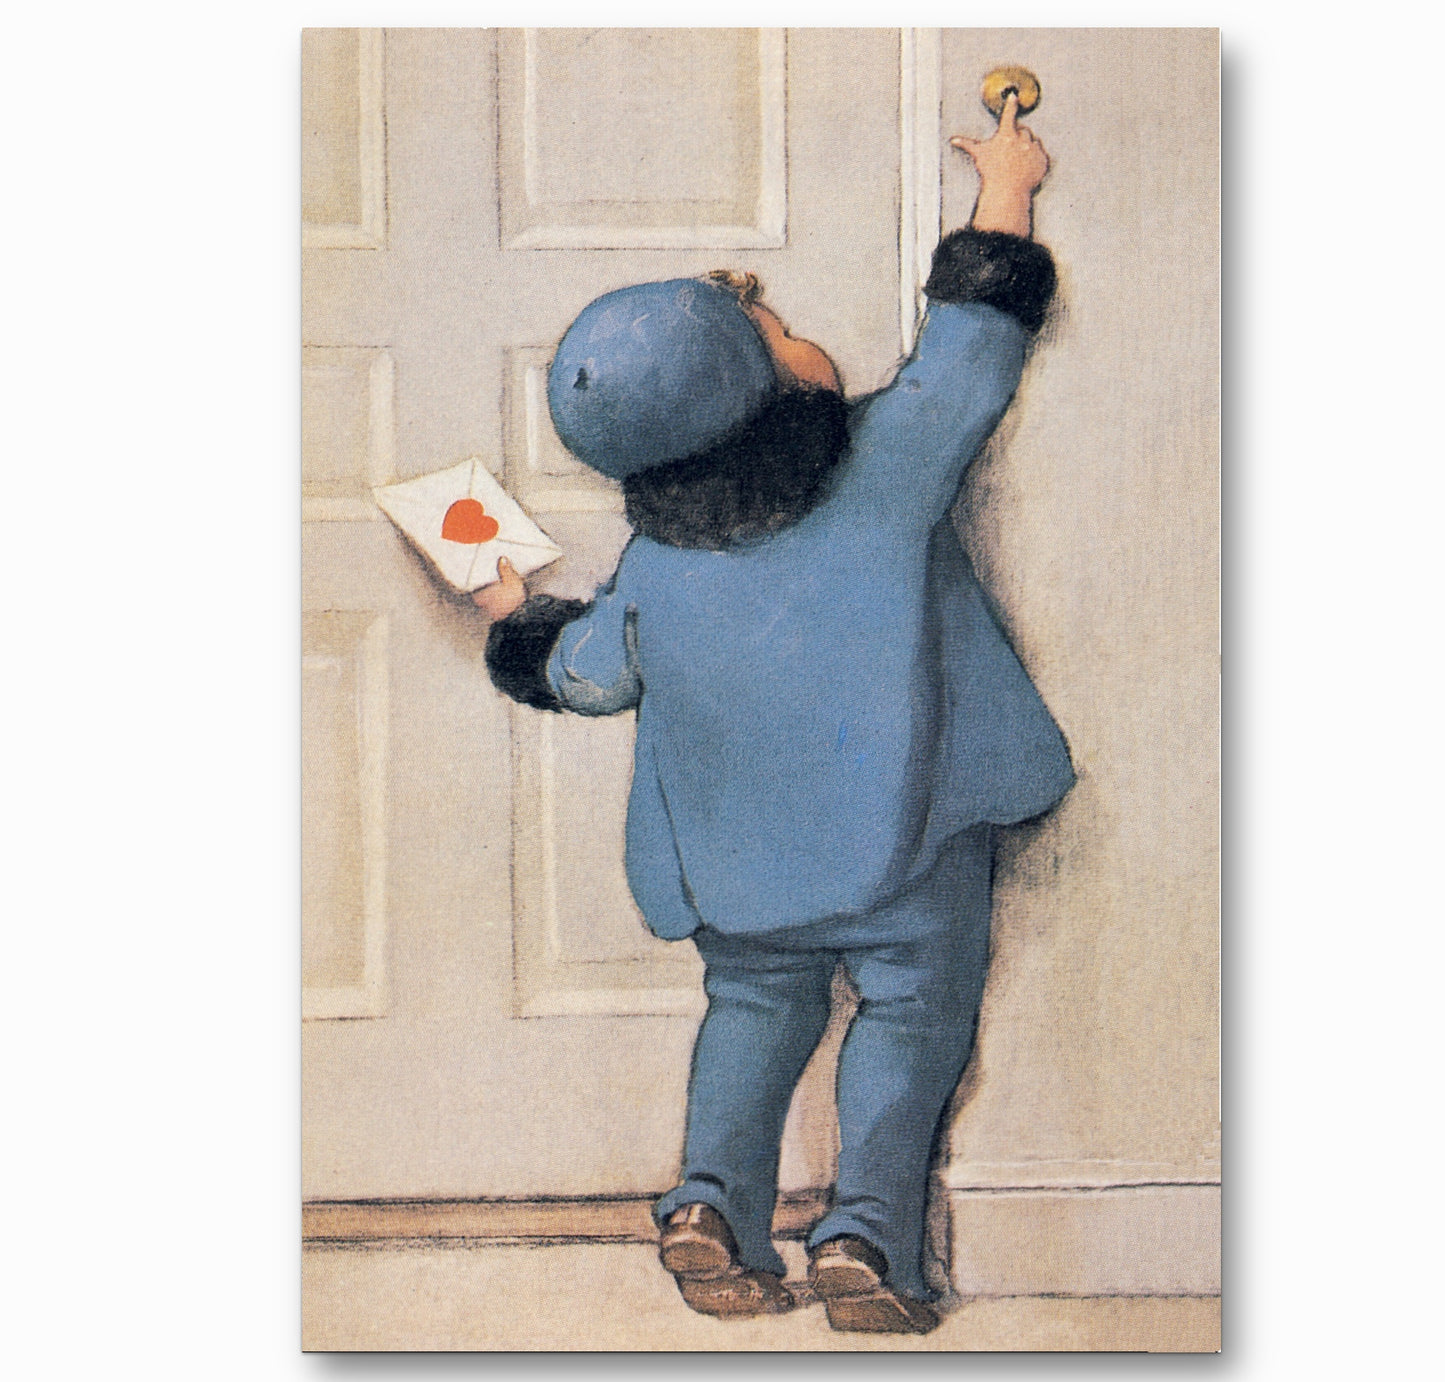 'Personal Delivery' by Jessie Willcox Smith